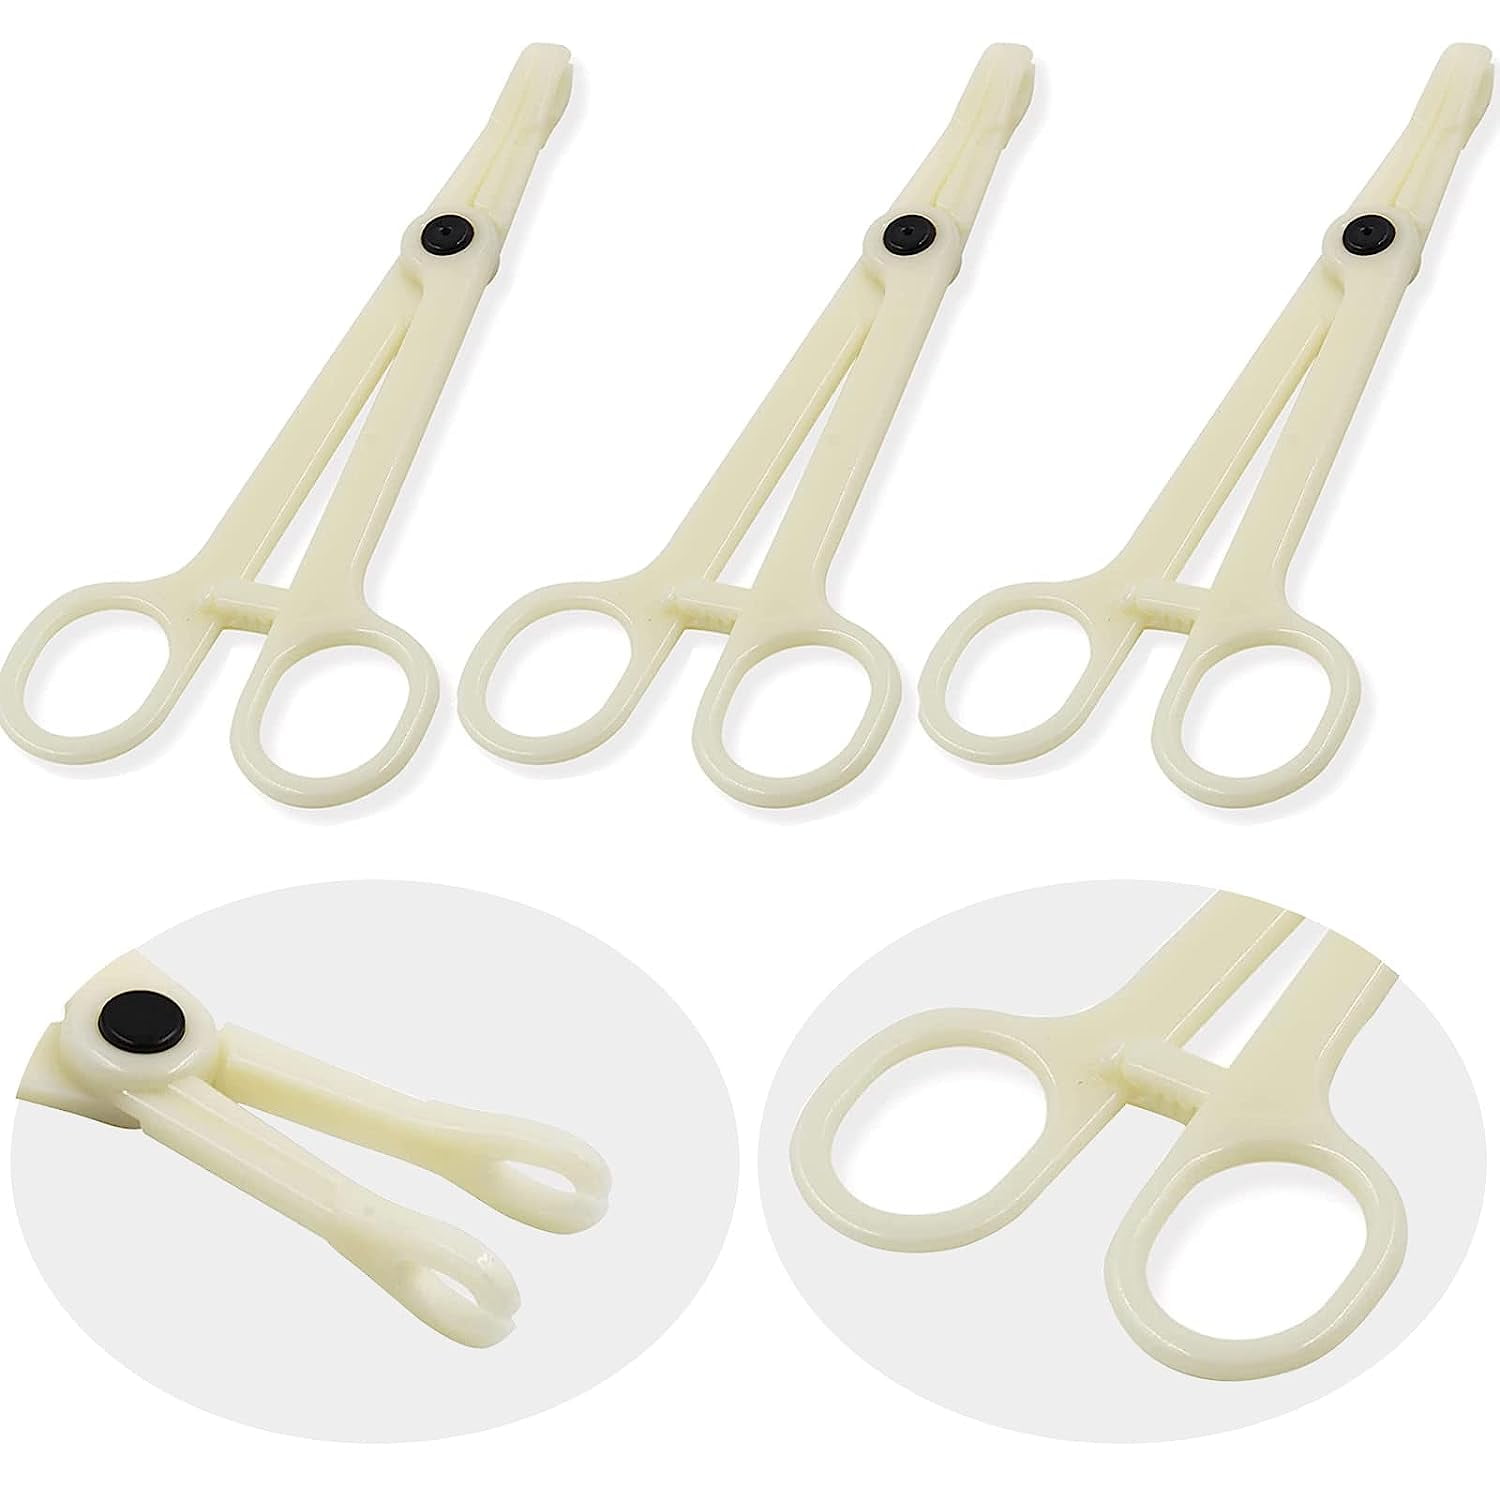 Disposable Piercing Clamps - EMALLA Sterile Piercing Clamps 8PCS Septum  Clamps Slotted Piercing Tools for Disposable Ear Piercing Kit Nose Piercing